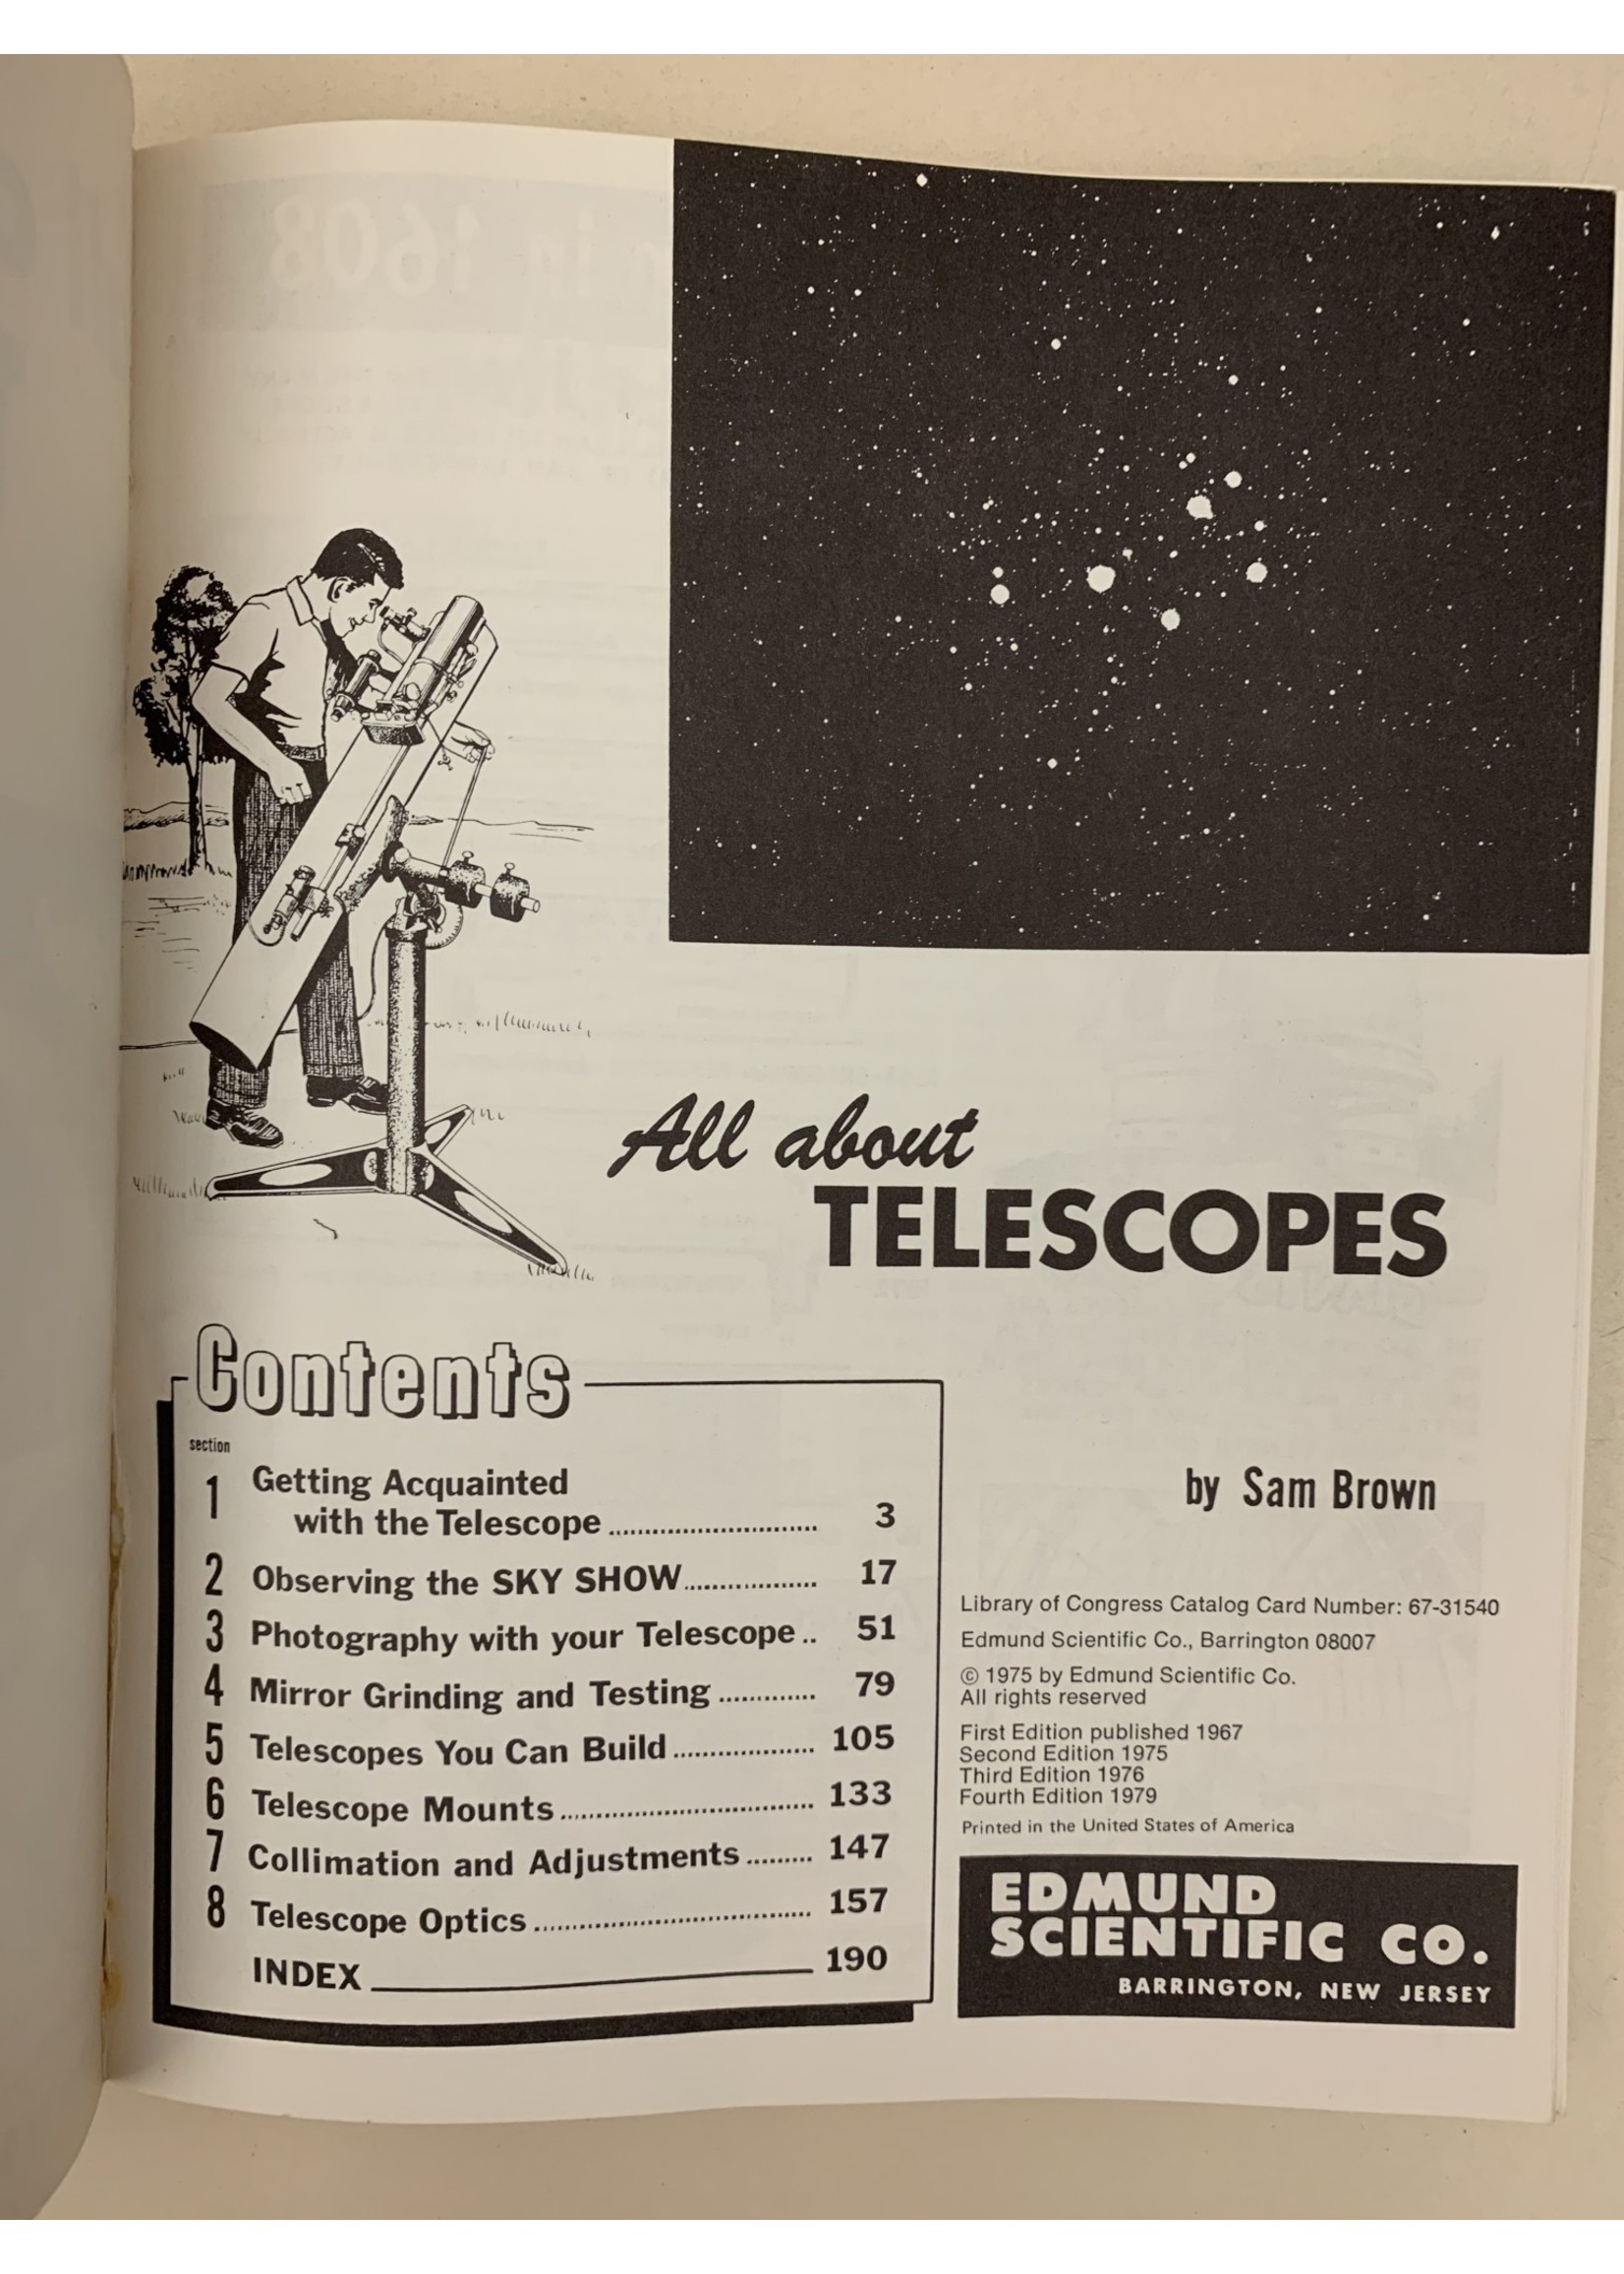 All About Telescopes by Sam Brown